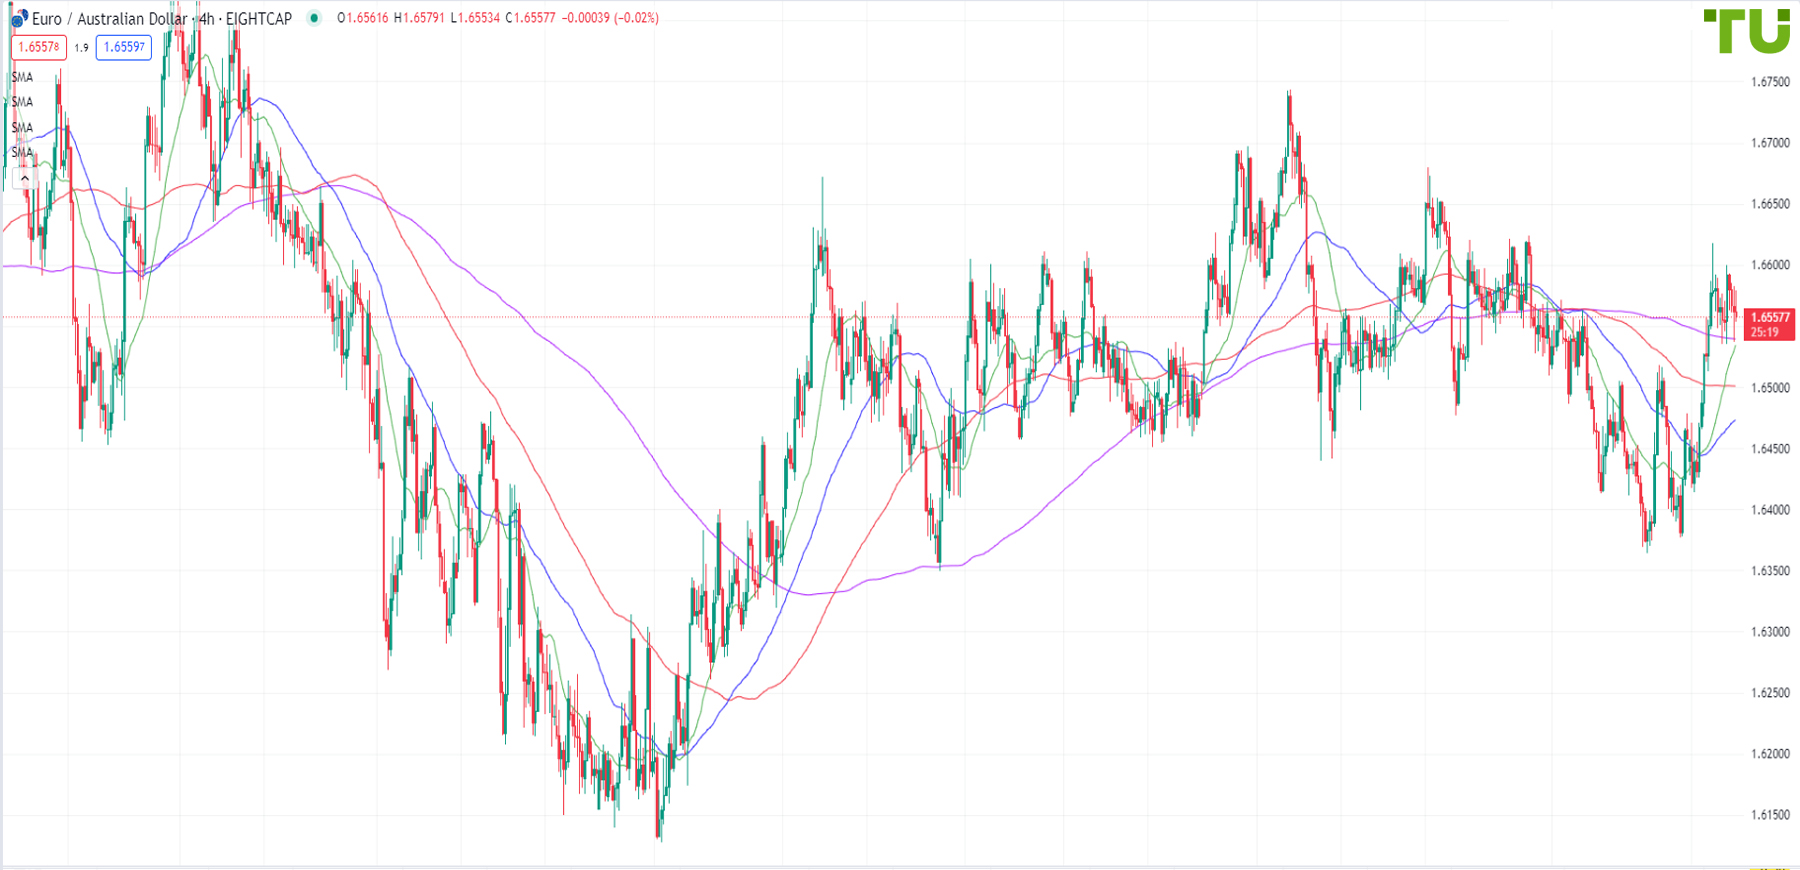 Euro/Australian dollar consolidates after growth